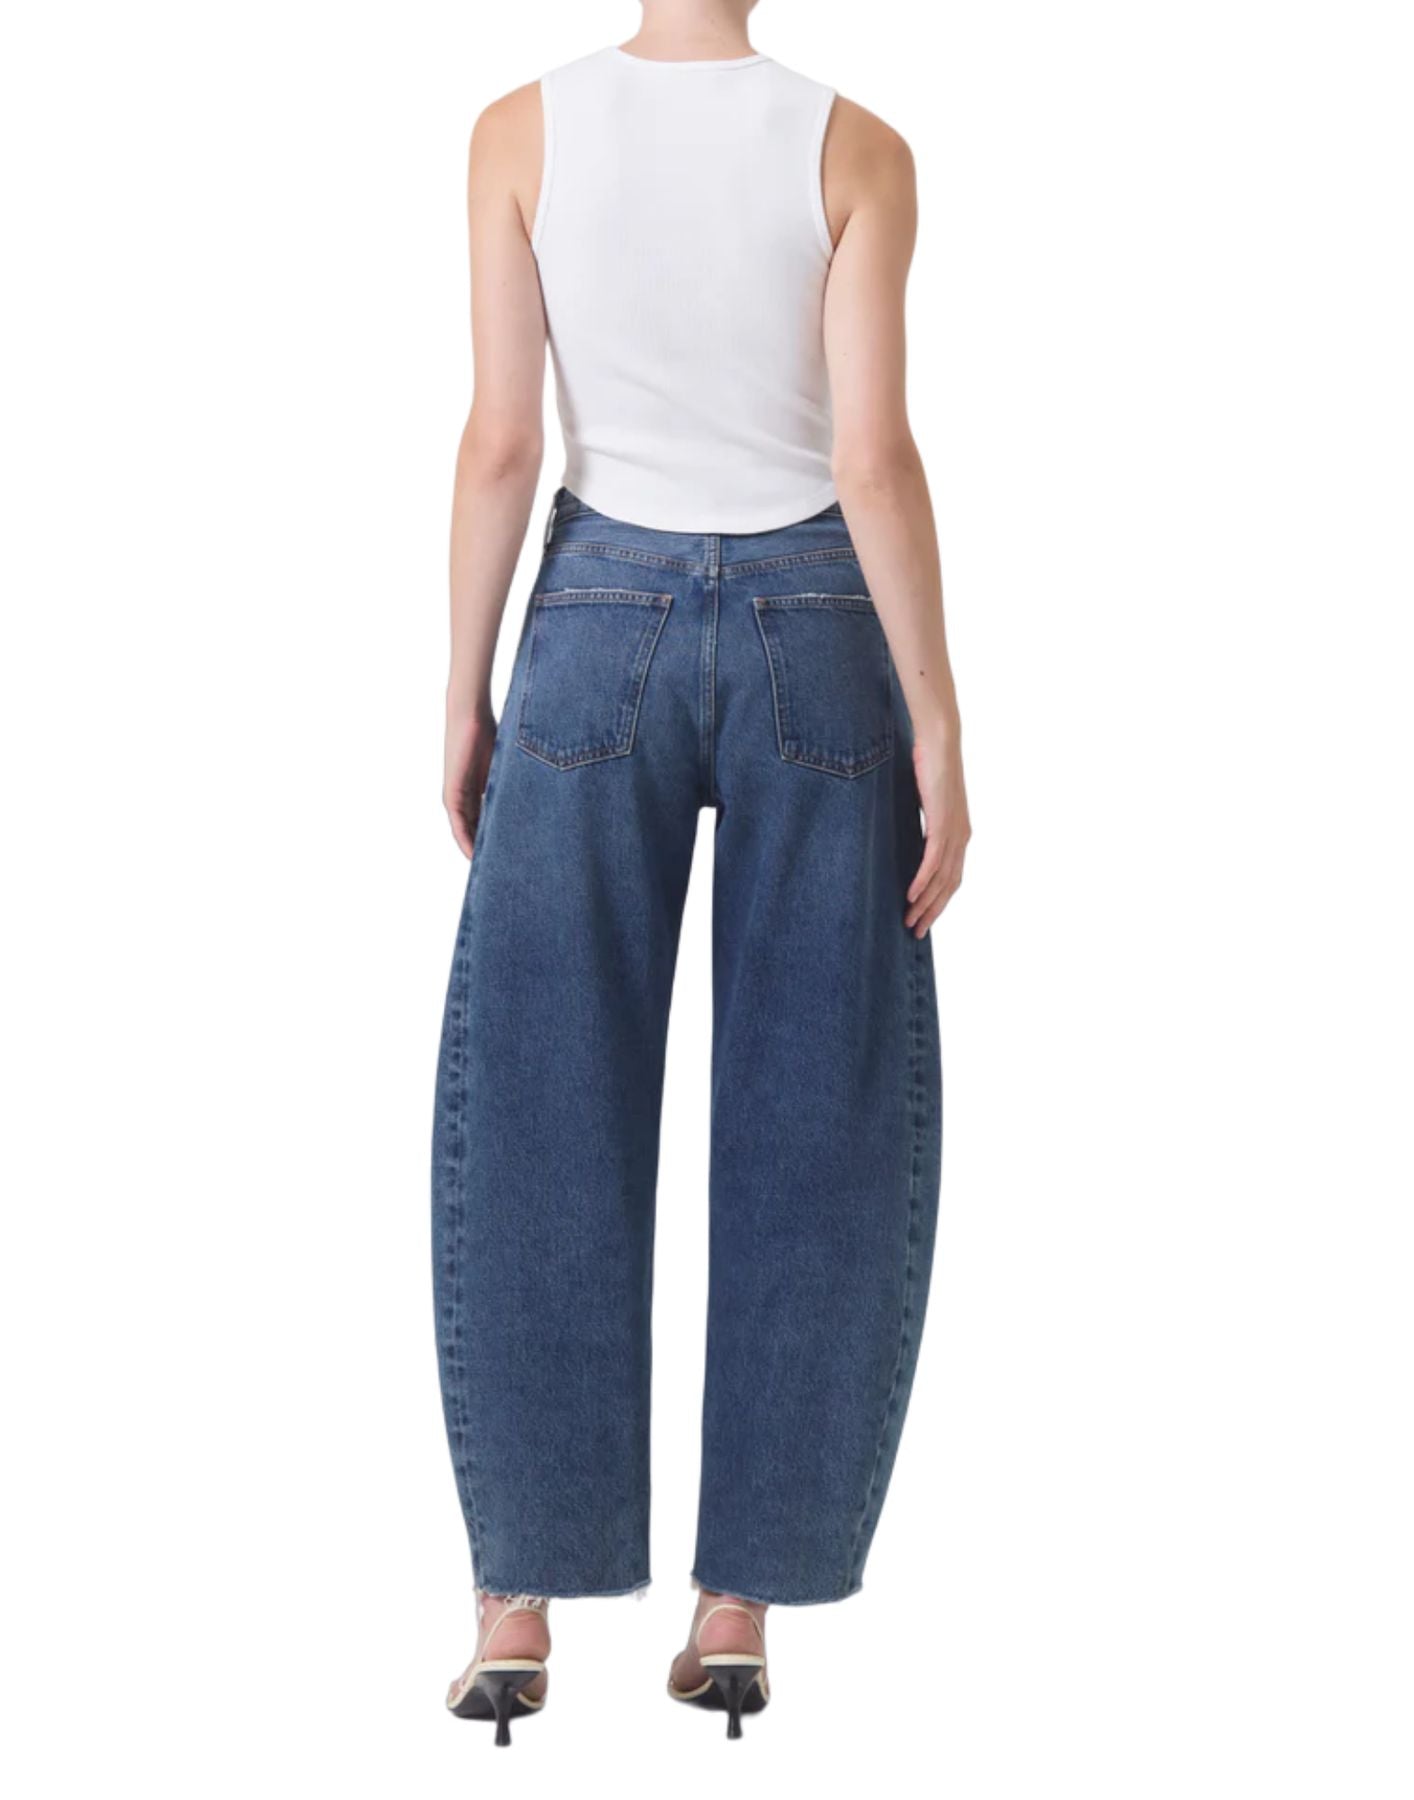 Jeans for woman A9039-1206 CONTROL Agolde